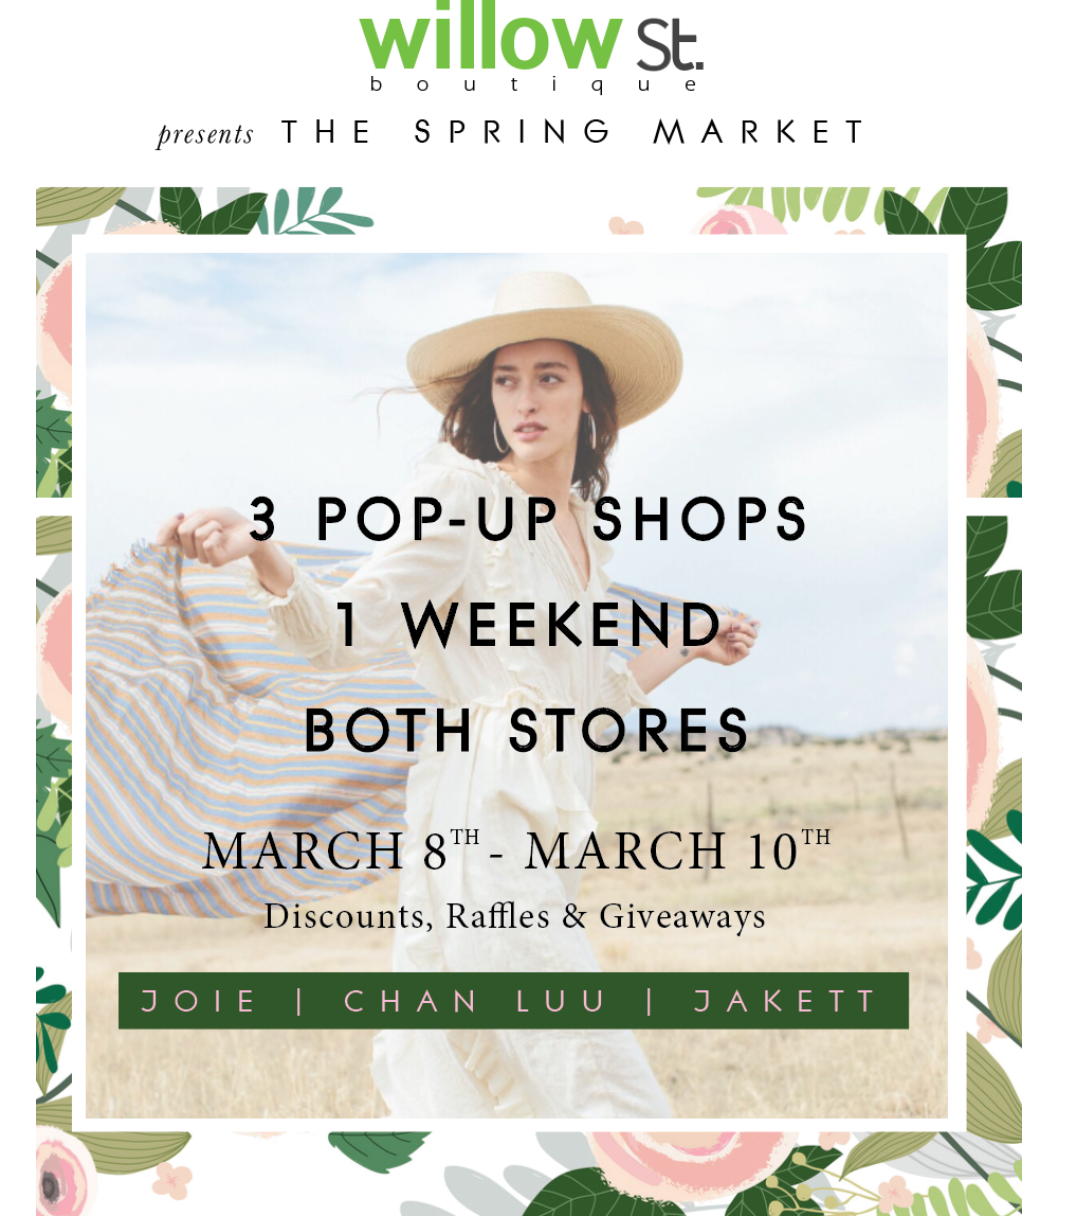 Willow St. Presents the Spring Market